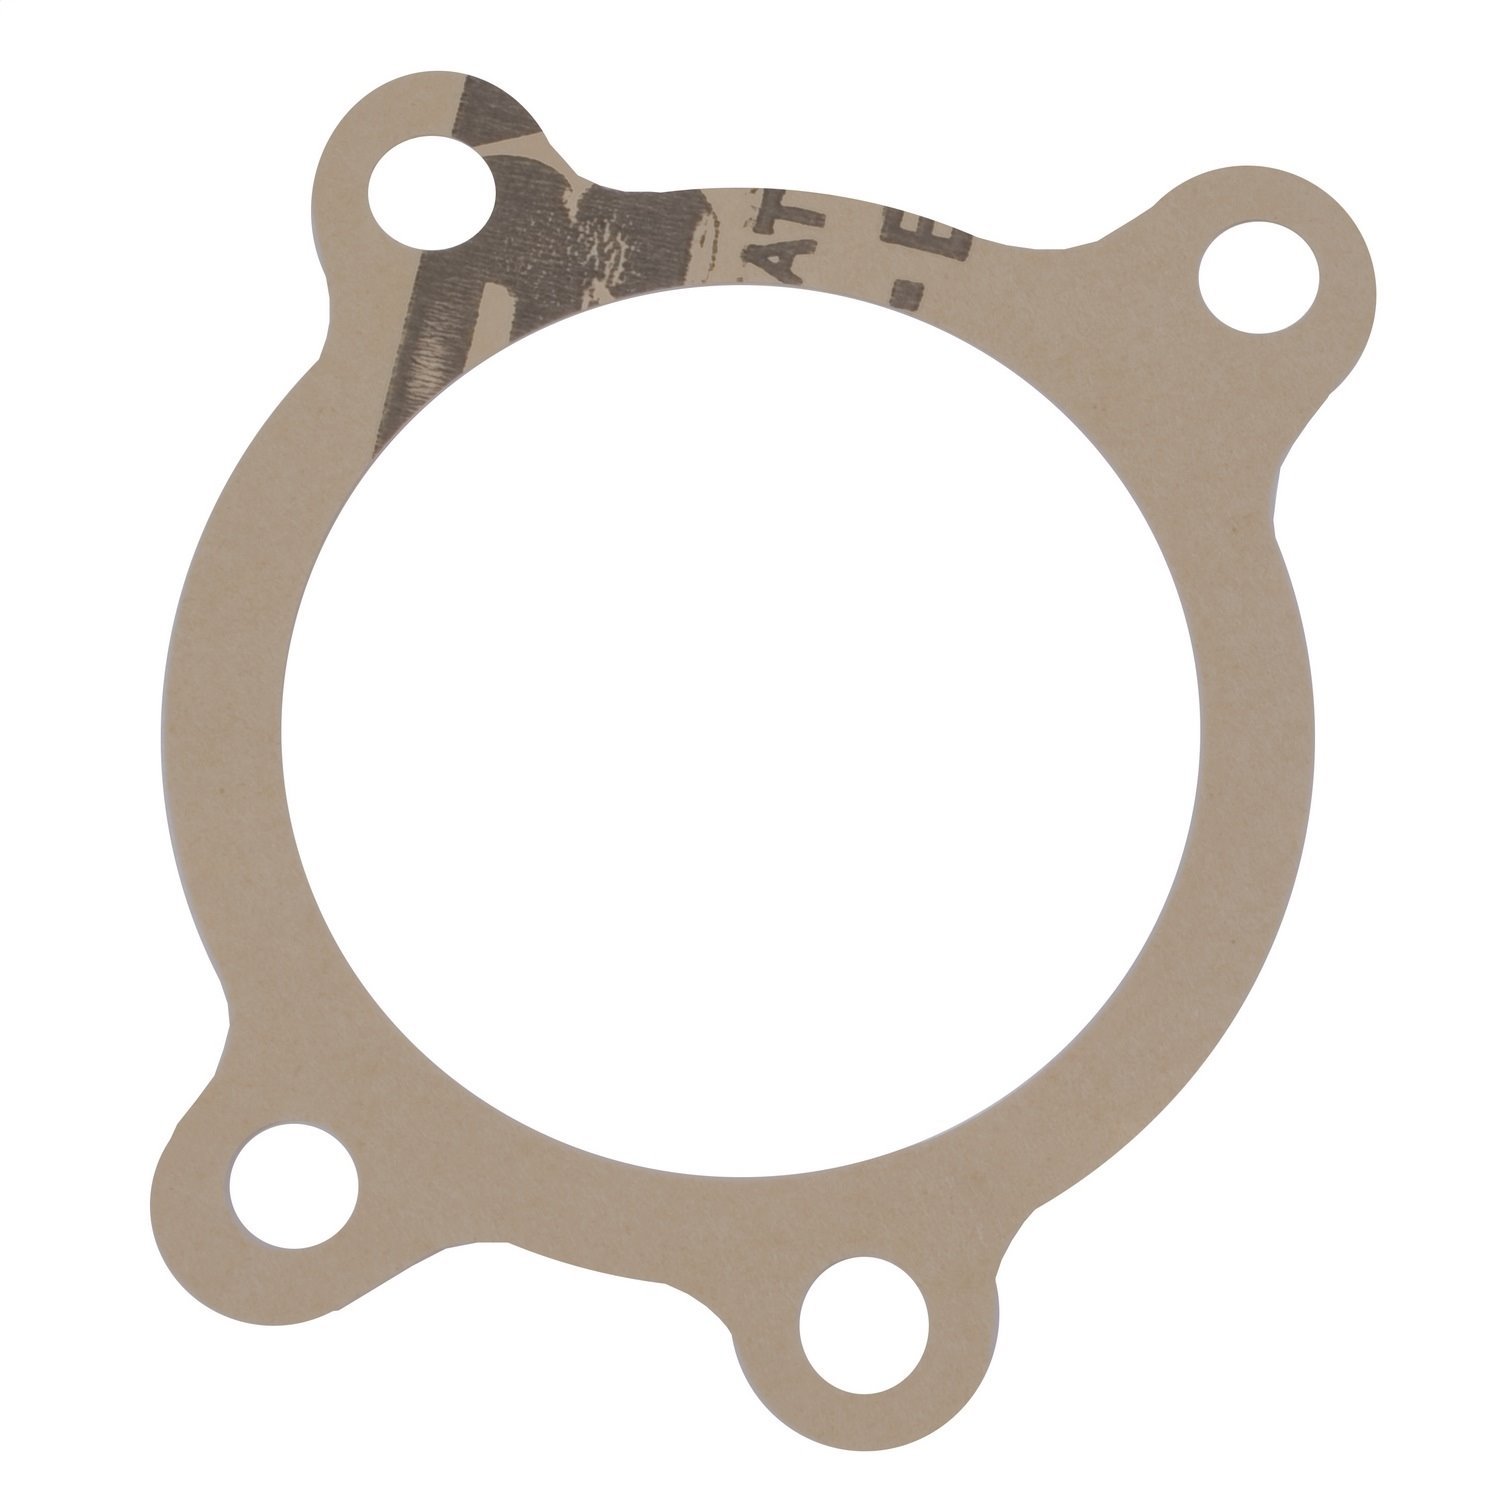 This brake backing plate to transfer bearing cap gasket from Omix-ADA fits 41-45 Willys MBs and Ford GPWs.